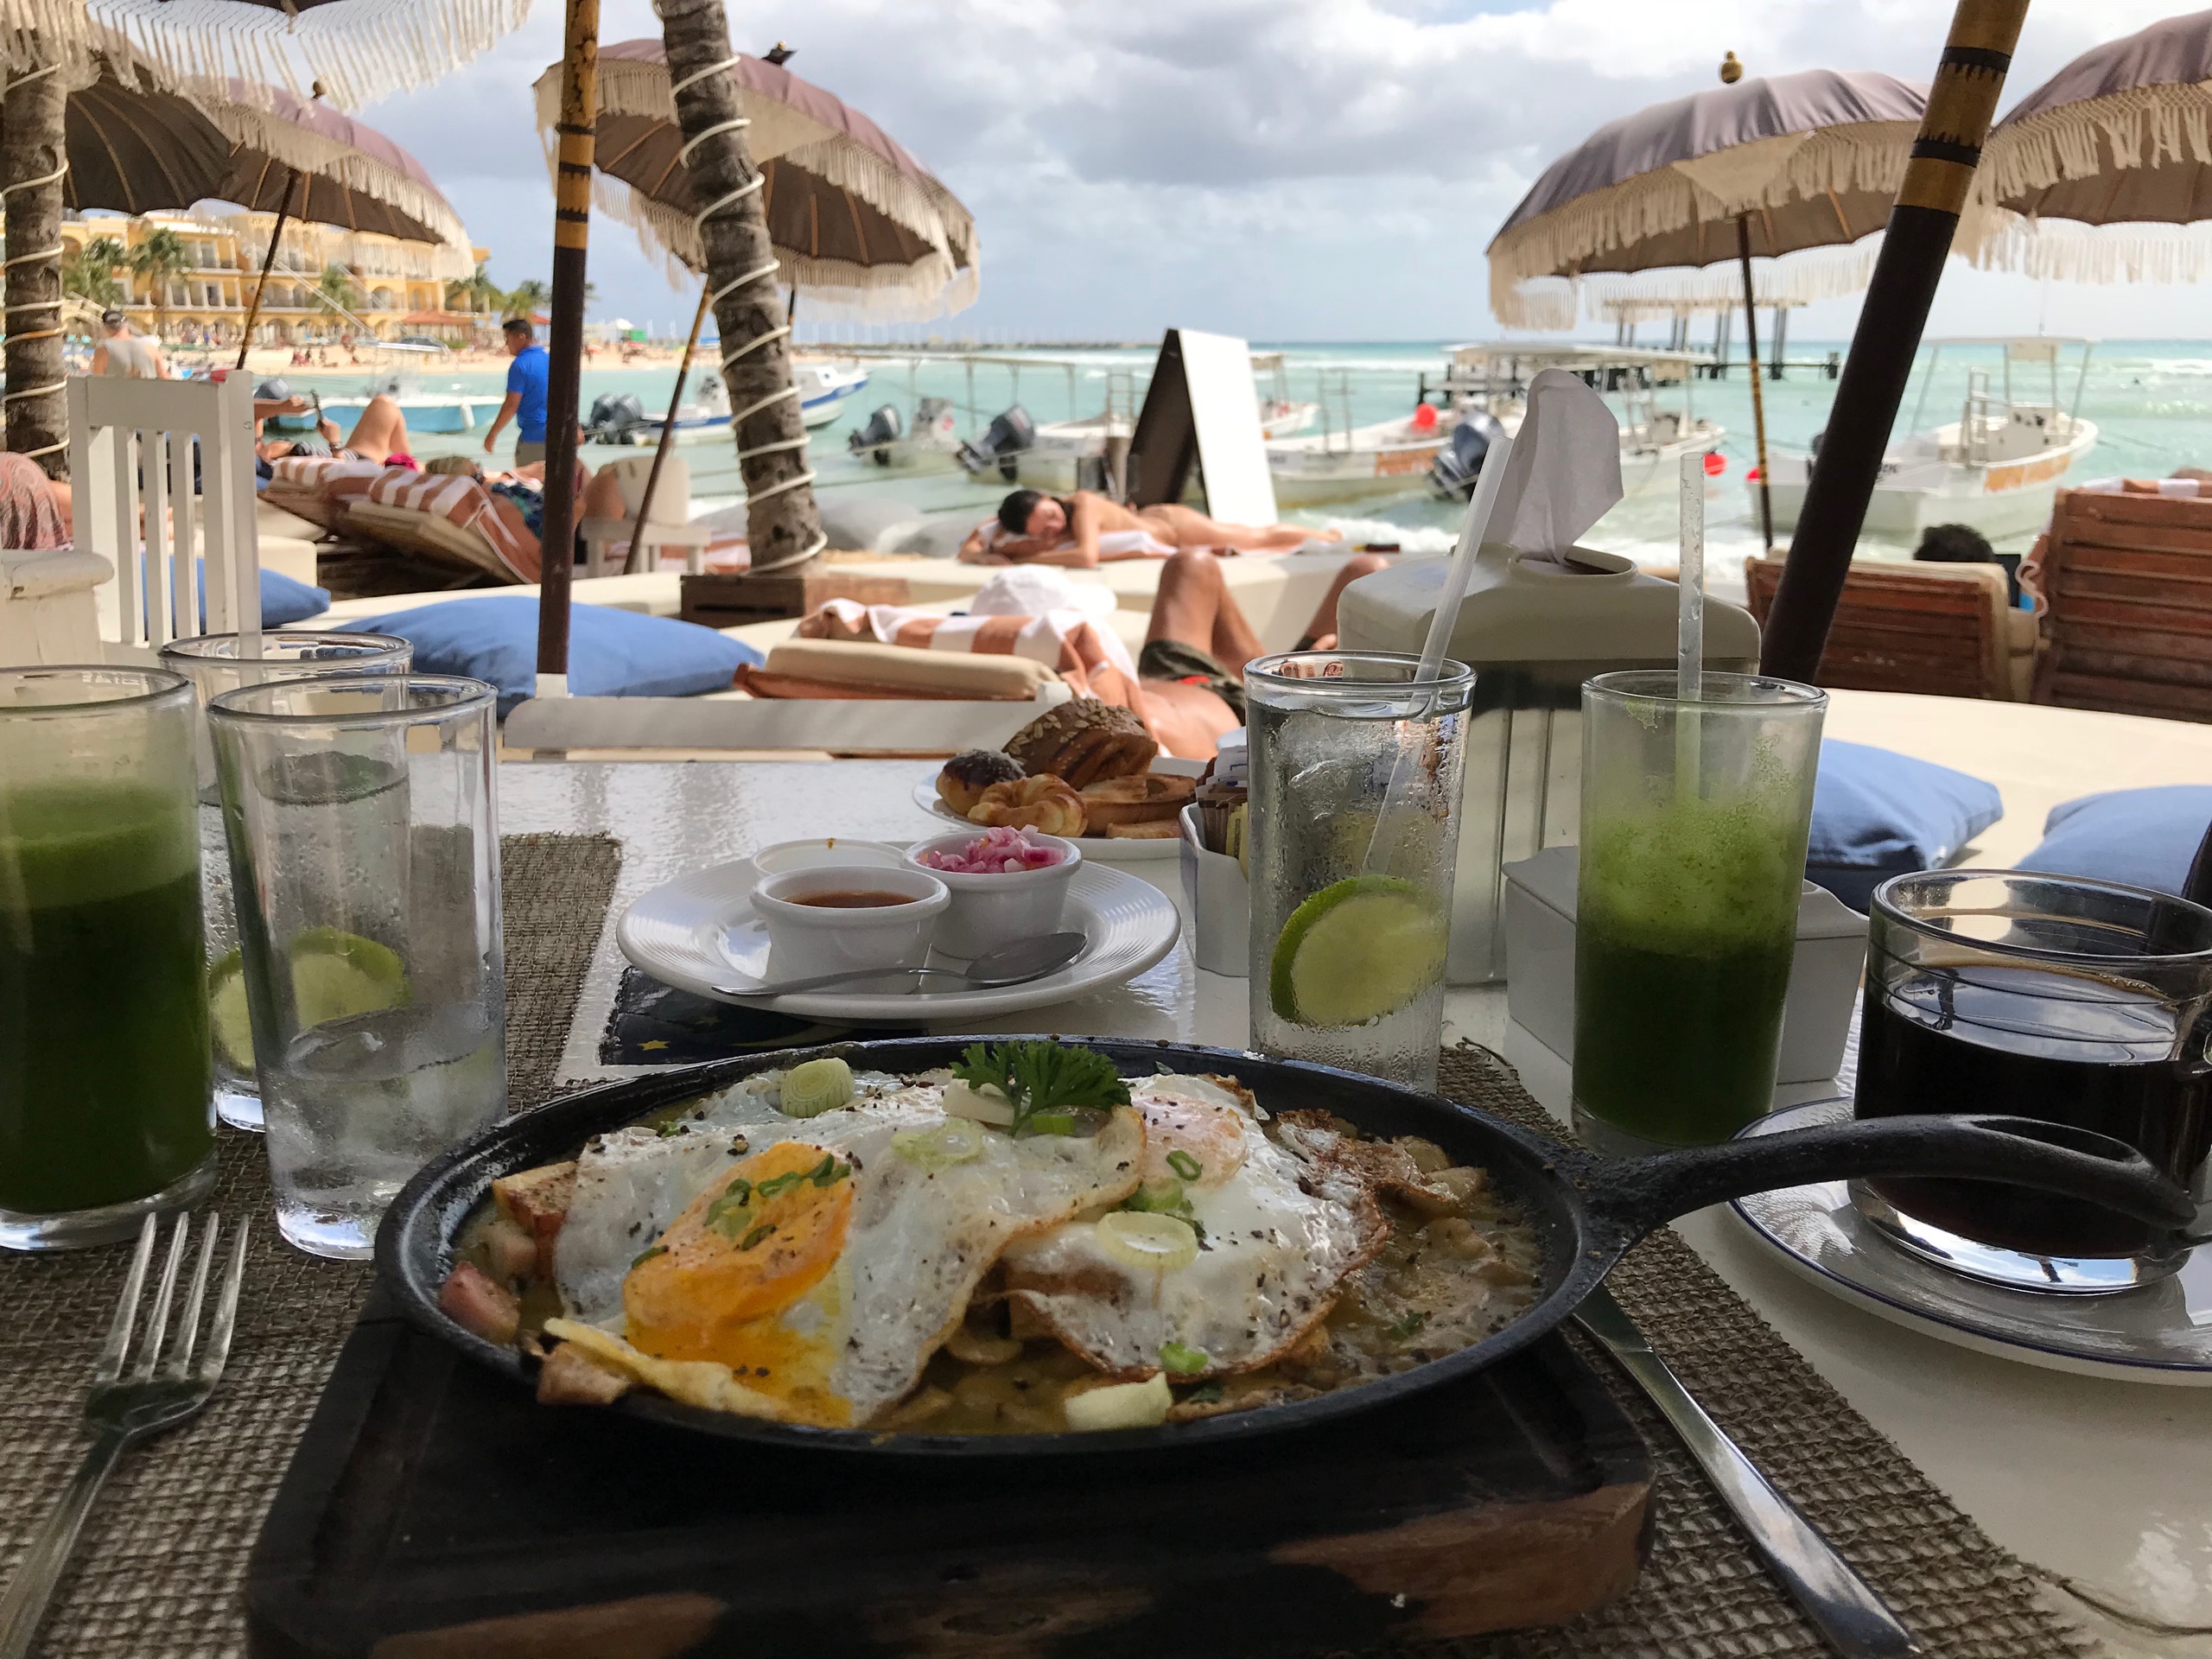 How To Have An Incredible Celebration In Playa del Carmen | Blissy Life